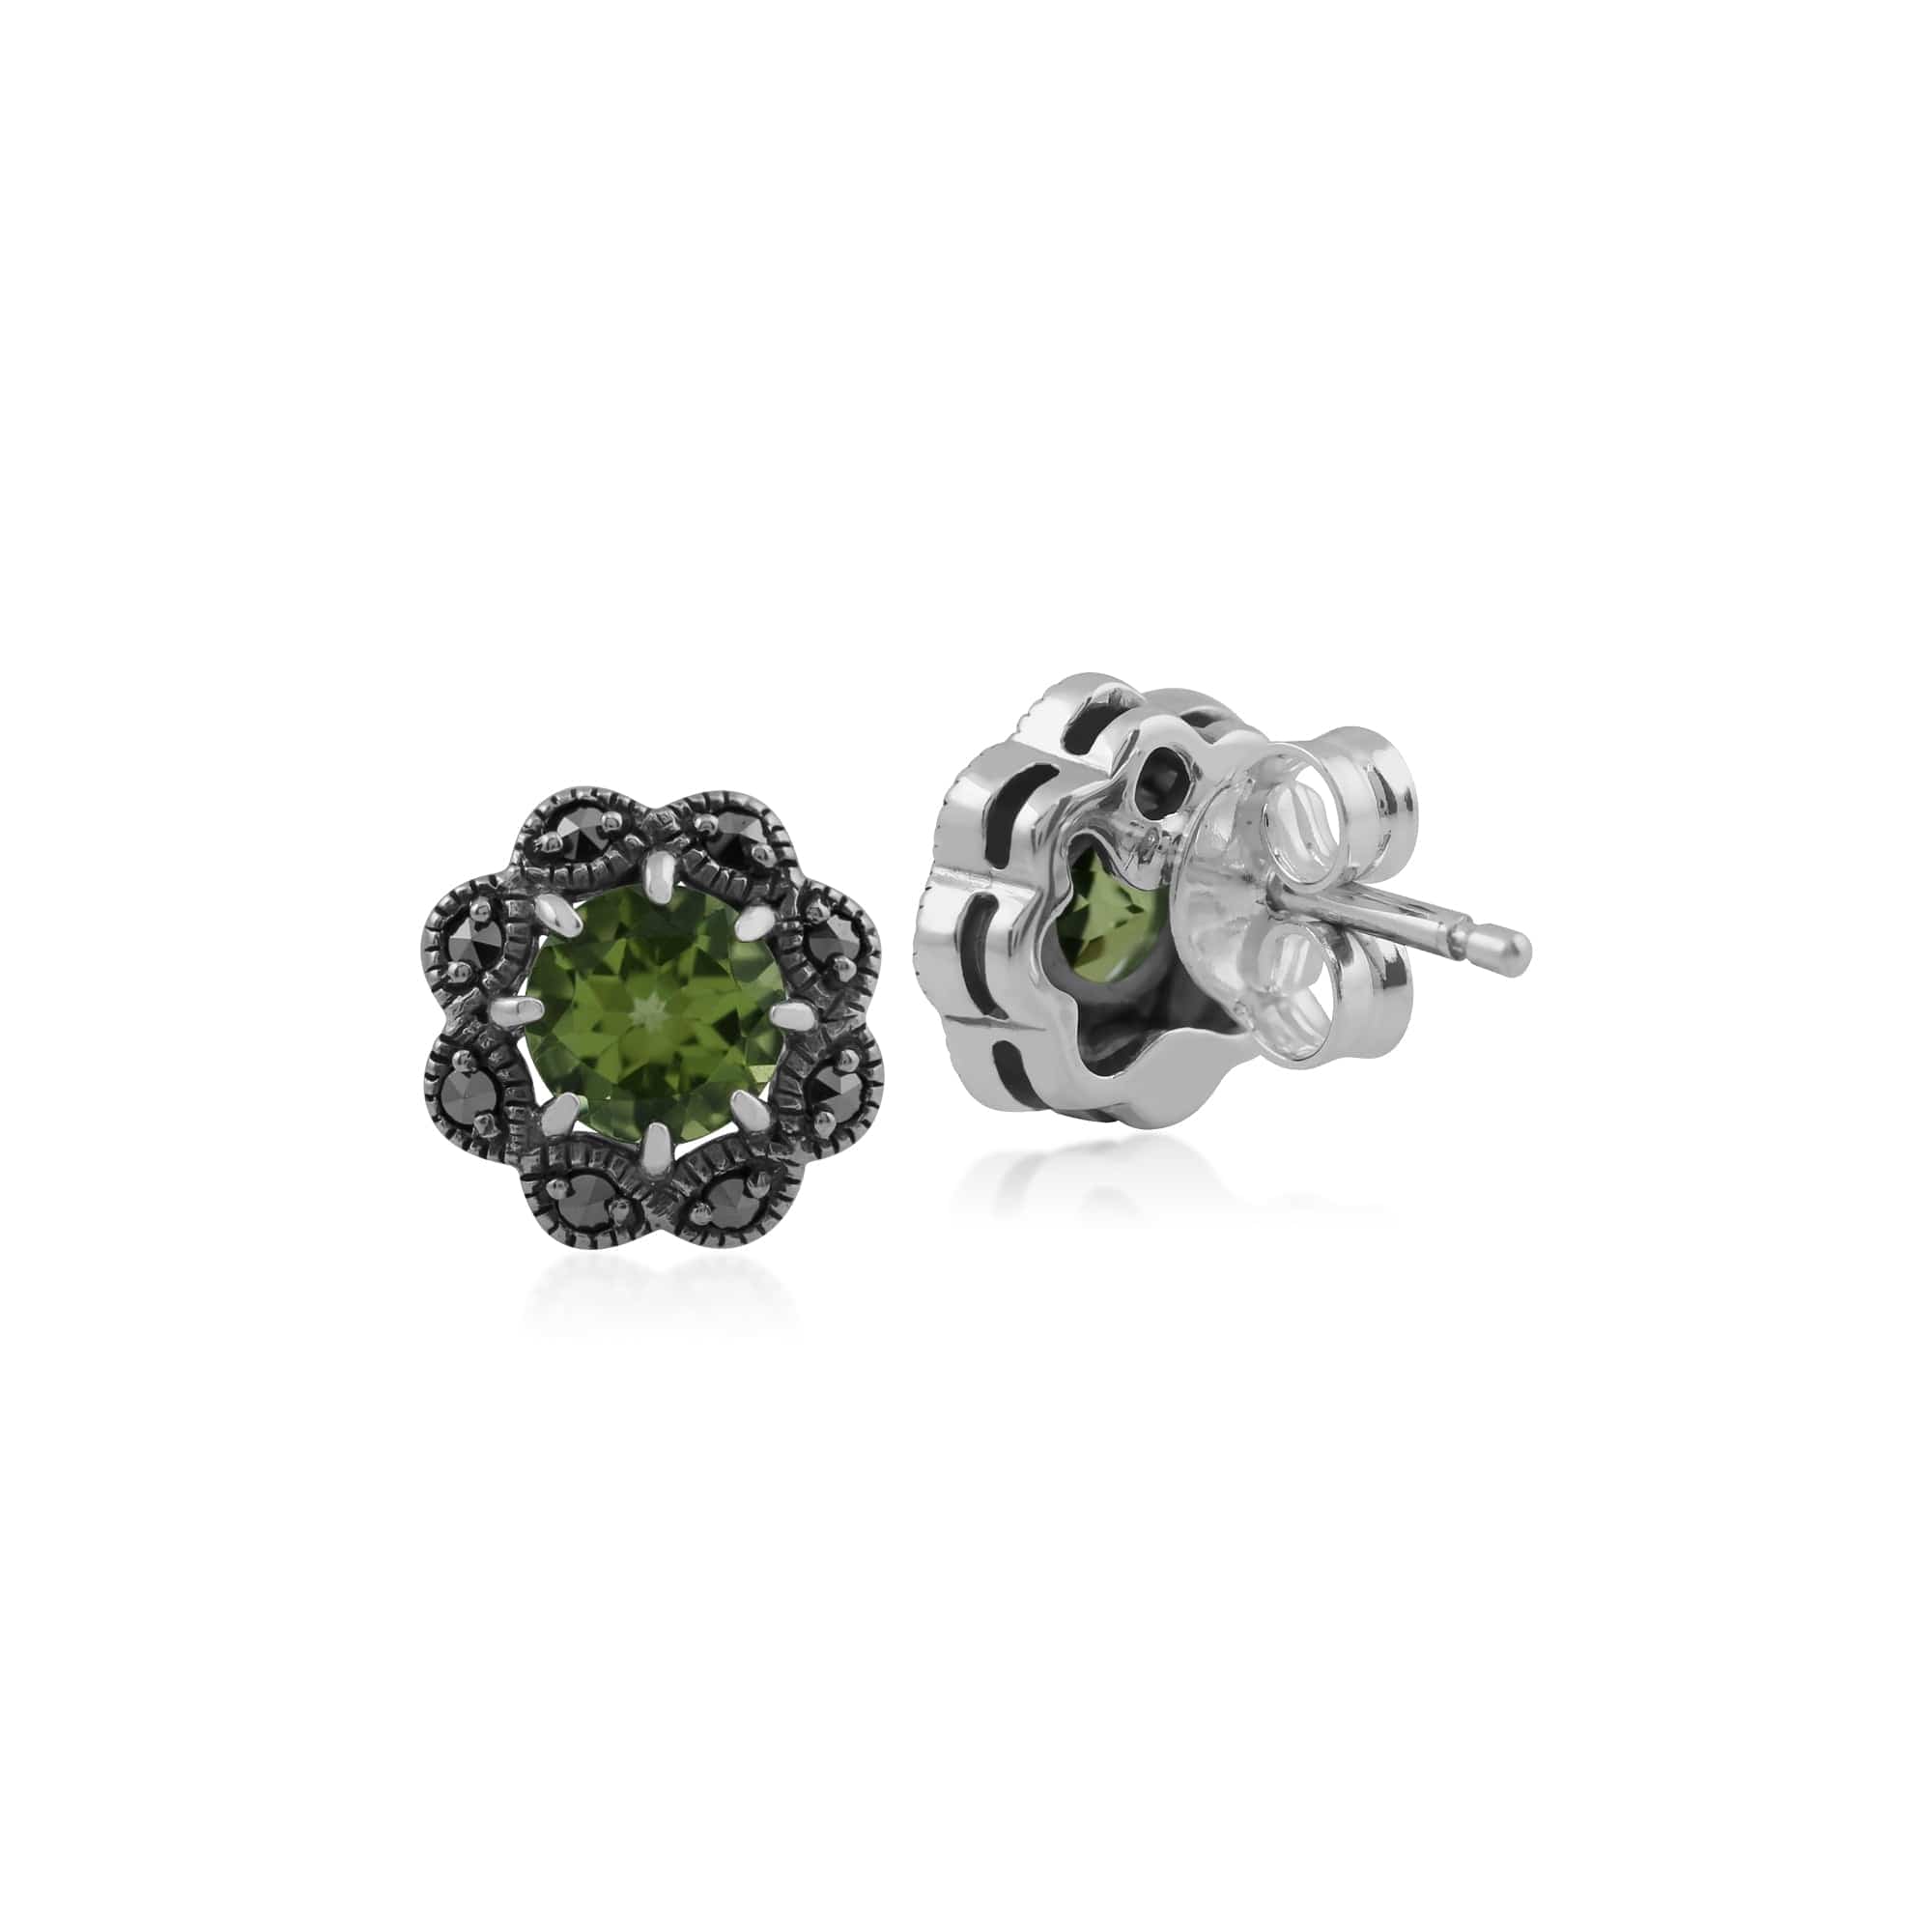 214E731507925 Floral Round Peridot & Marcasite Cluster Stud Earrings in 925 Sterling Silver 2